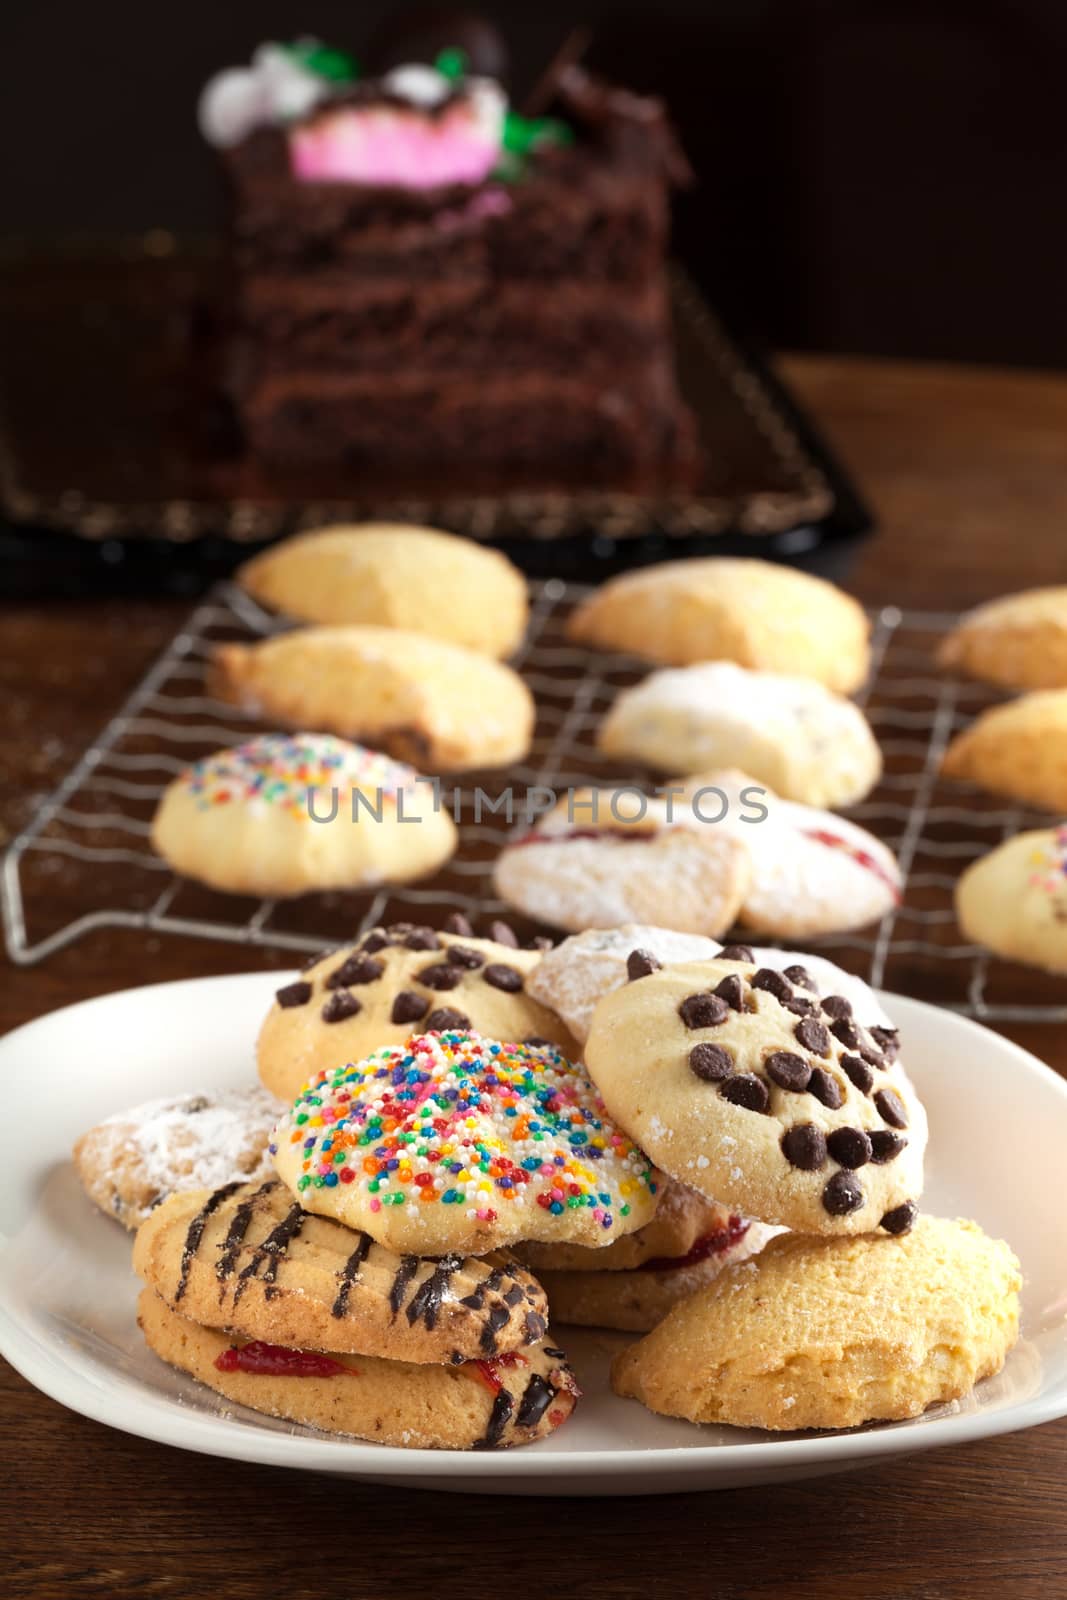 Italian cookies on a plate and some cooling on a rack in the background. Shallow depth of field.